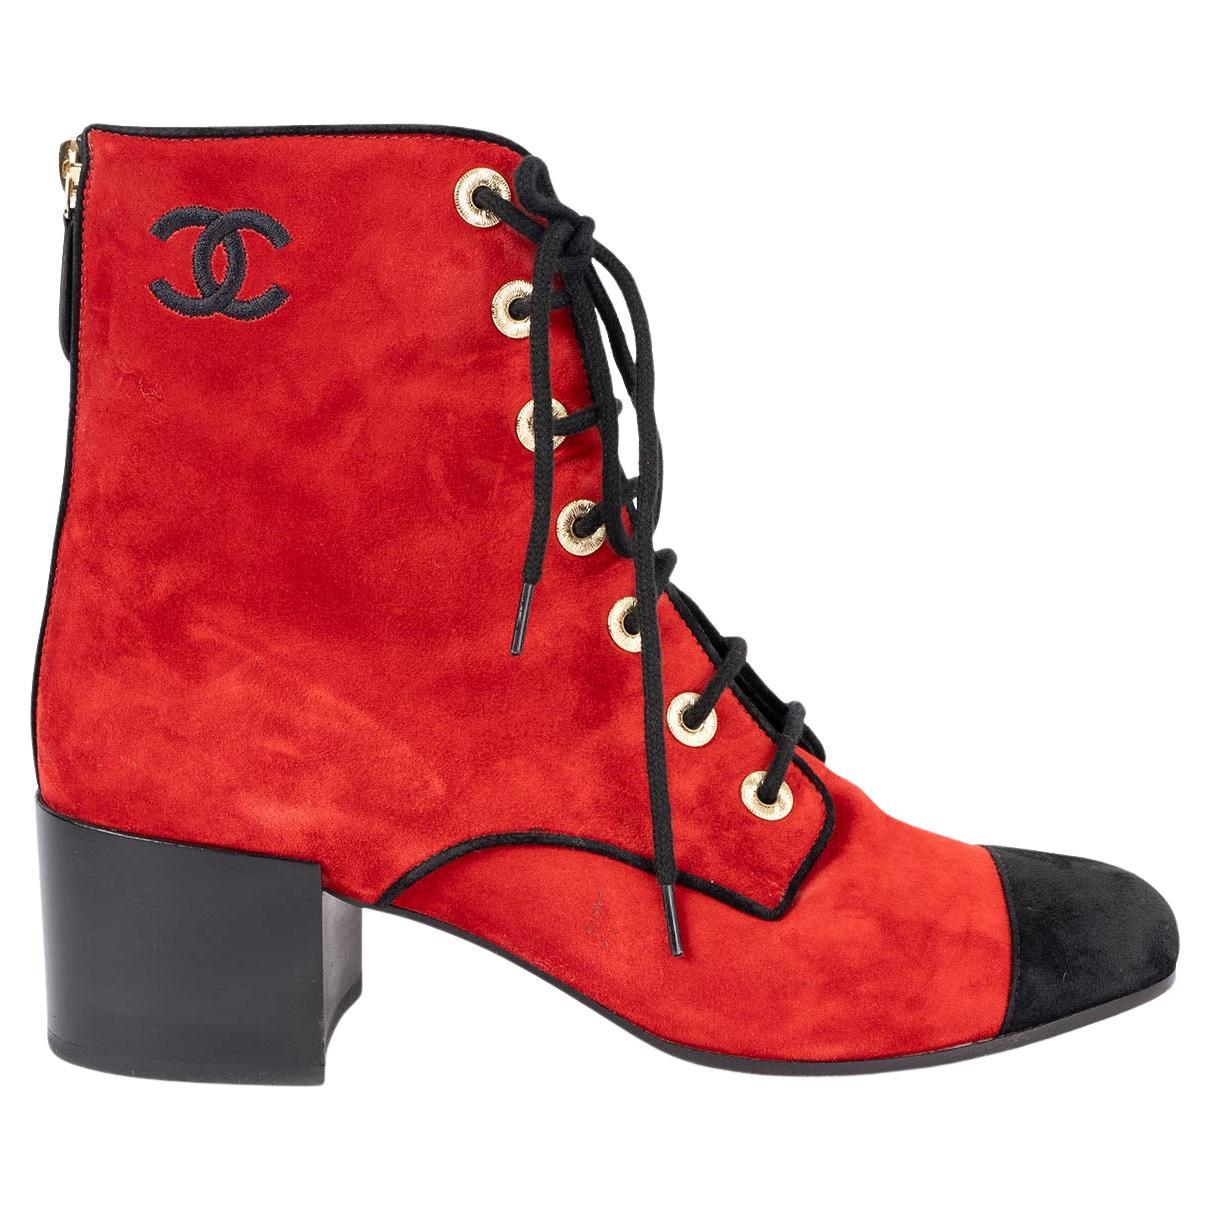 Chanel Red Suede 2019 19K Block Heel Lace Up Boots Shoes 39